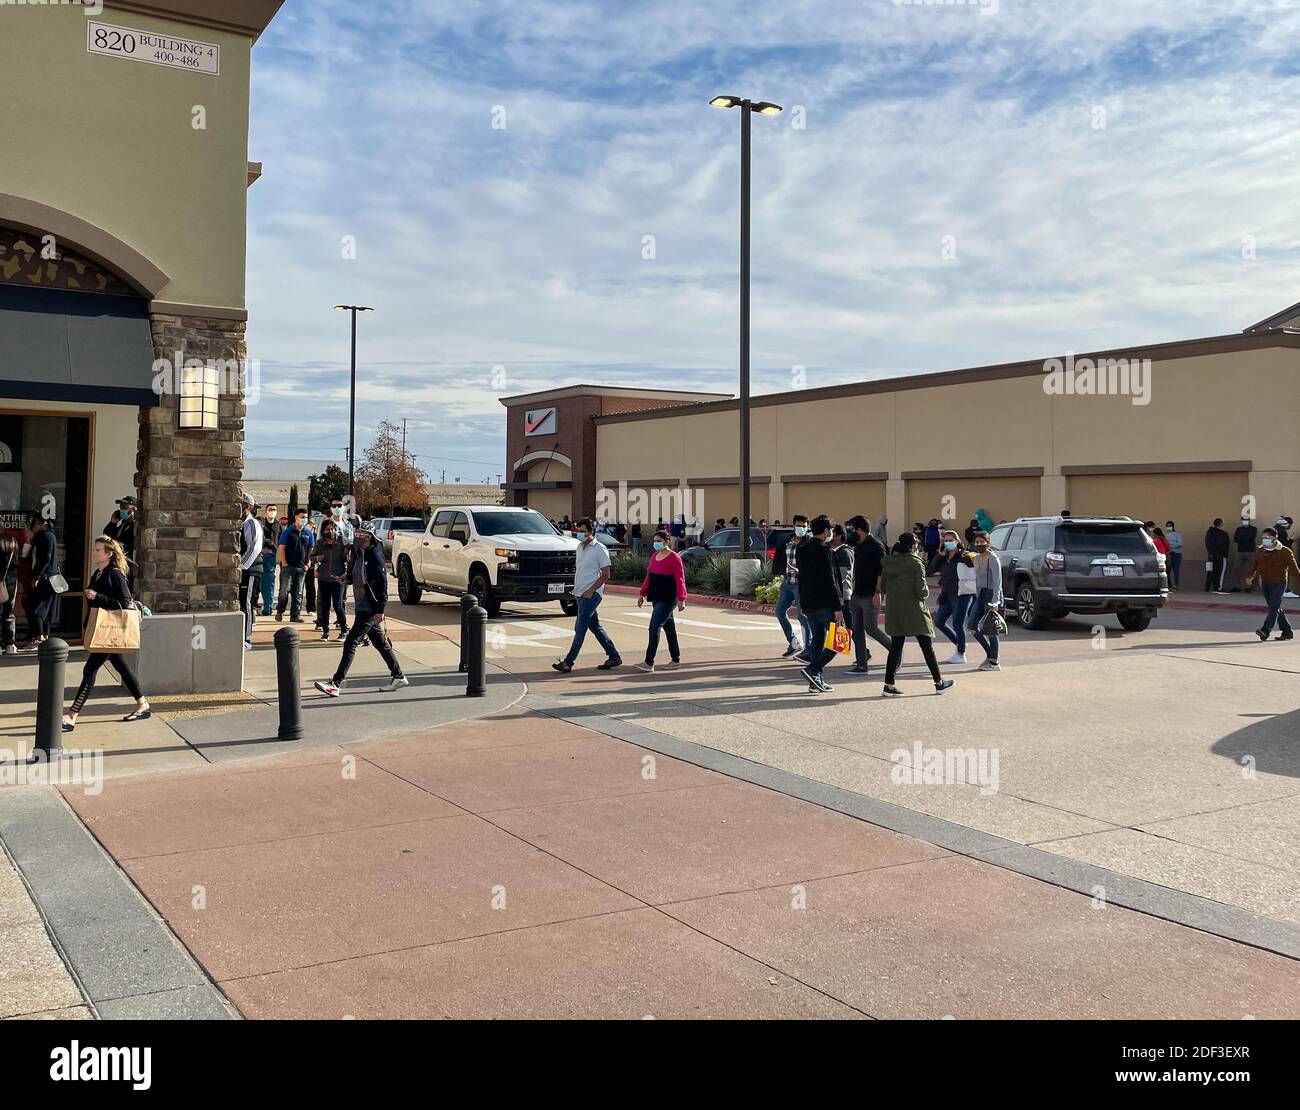 Allen, TX / USA - November 27, 2020: A view of people wearing the mask and carrying the shopping bags walking at the Allen Premium Outlets on Black Fr Stock Photo